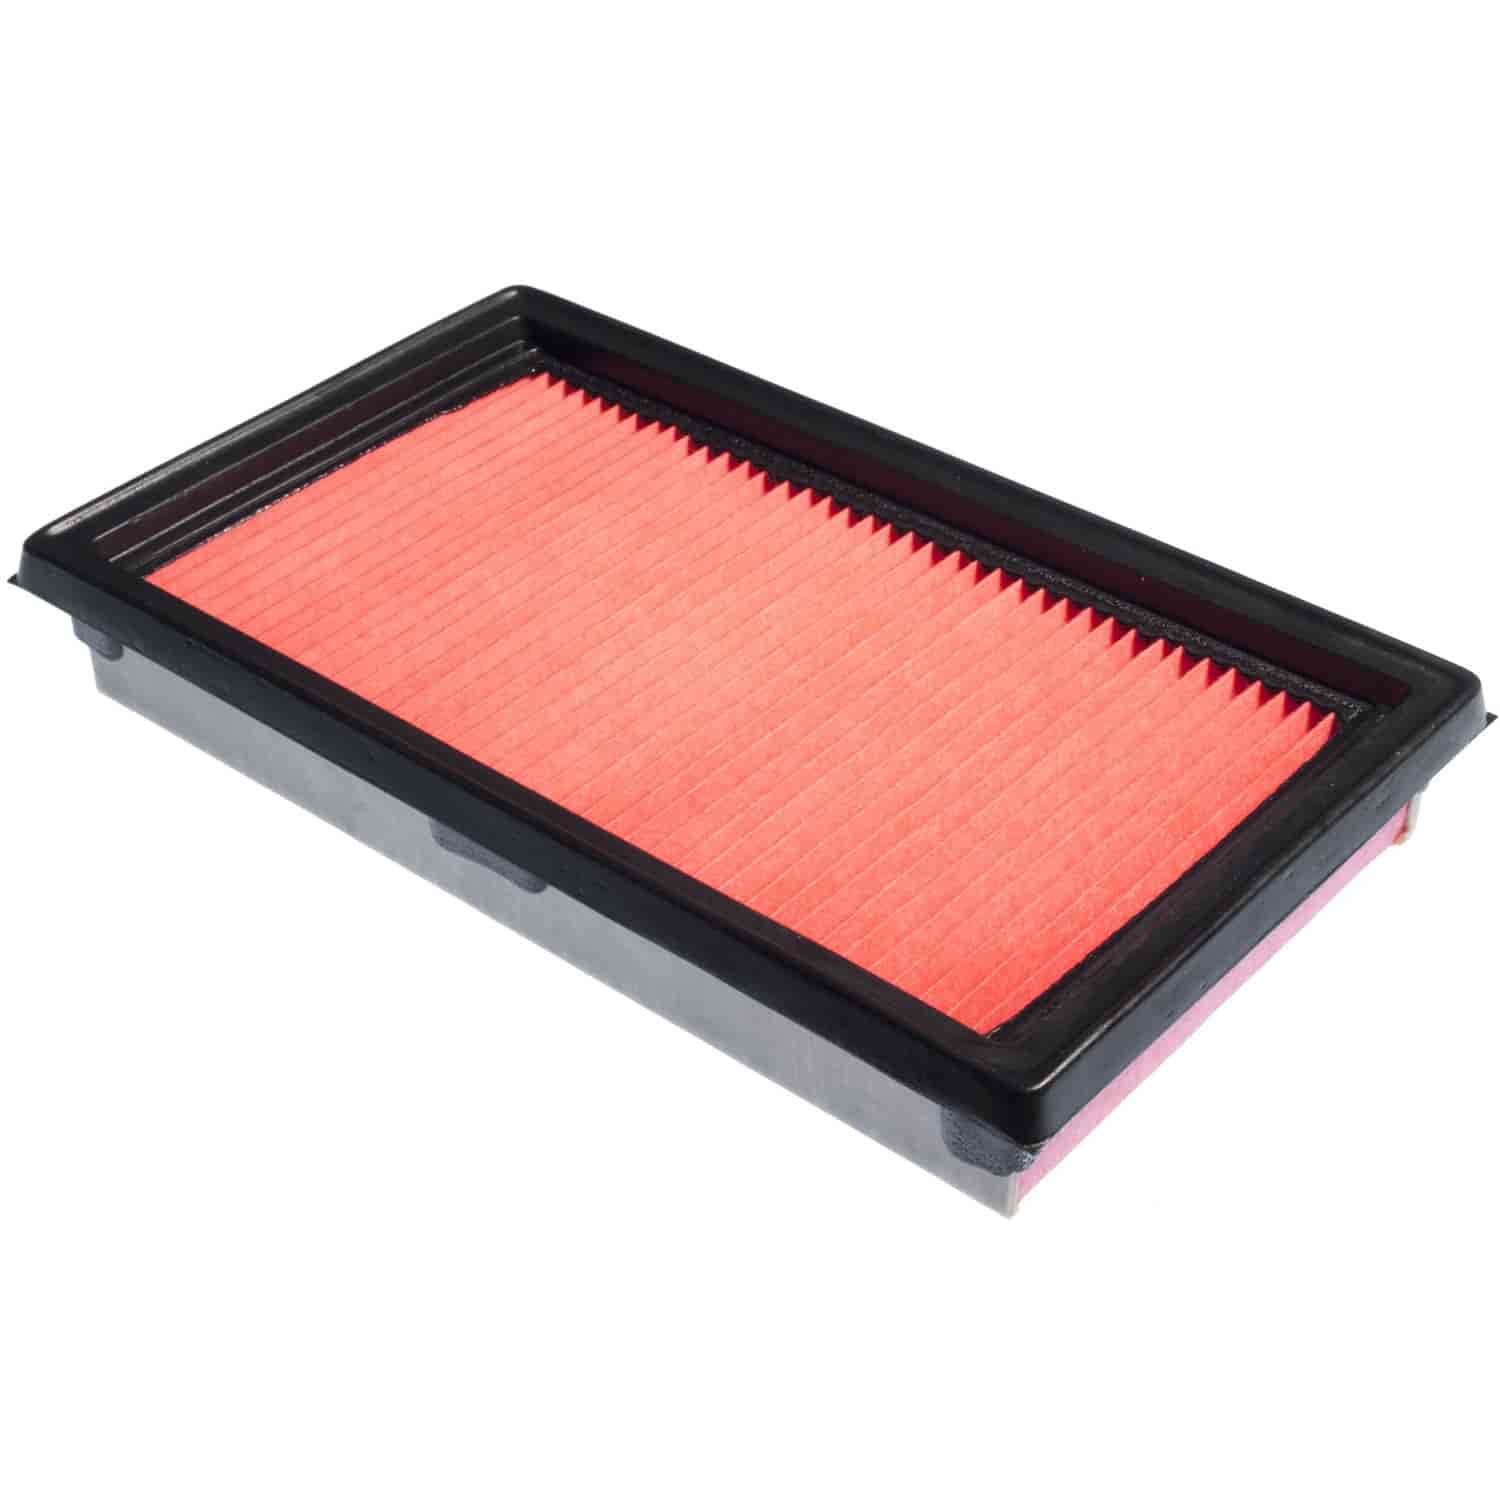 Mahle Air Filter for Nissan Versa and Cube 1.8L DOHC 2007-2009